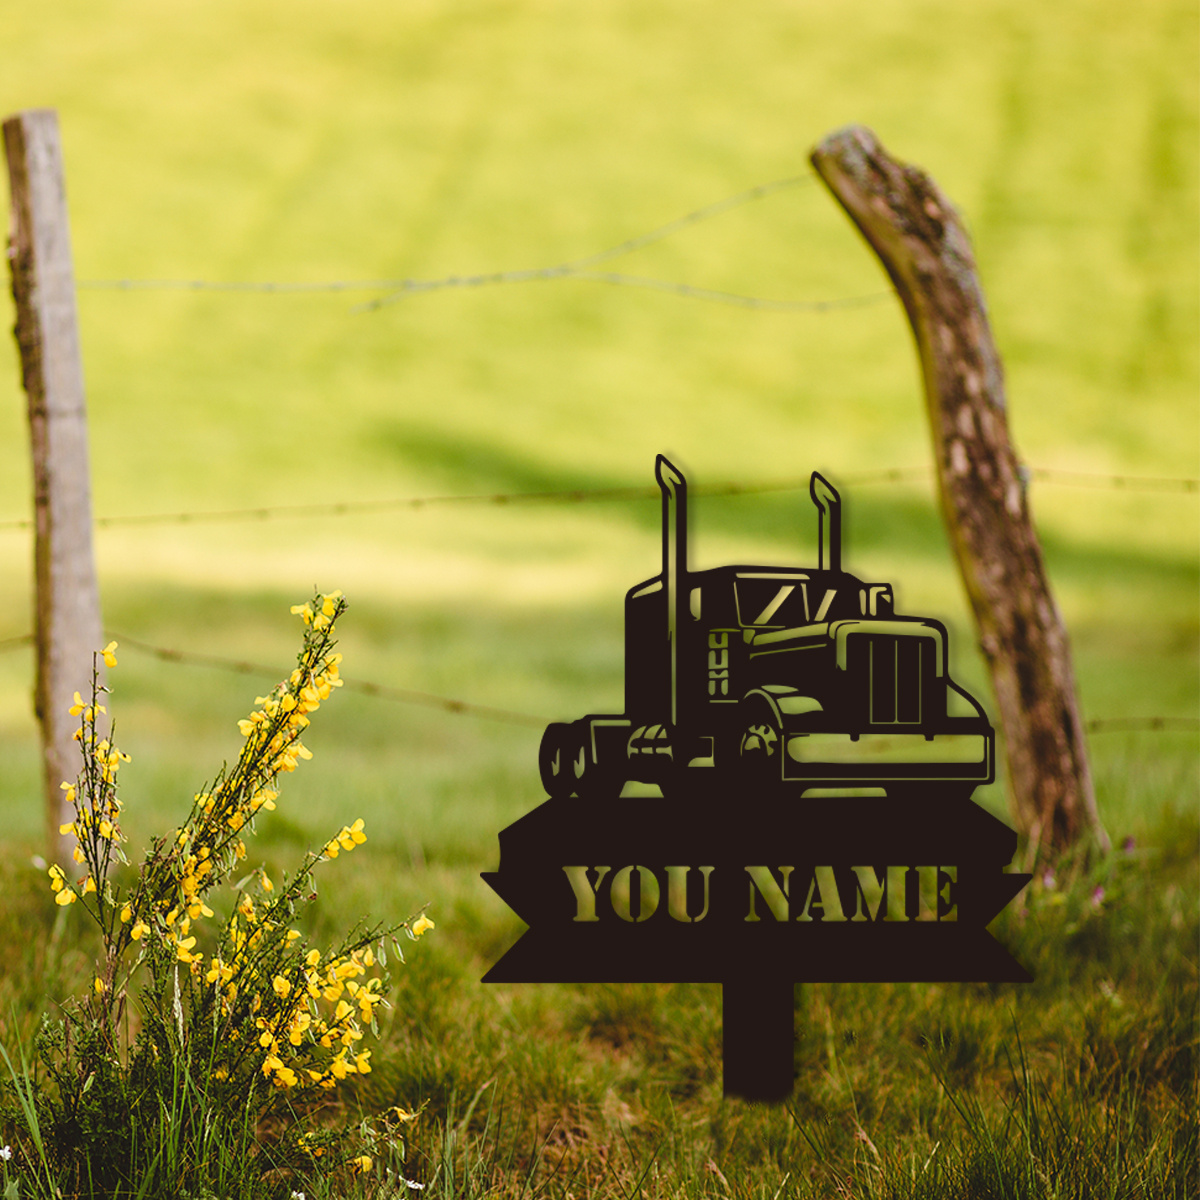 

Custom Semi Truck Driver Memorial Stake - Personalized Metal Grave Marker With Name Sign, Big Rig Remembrance Decor Gift